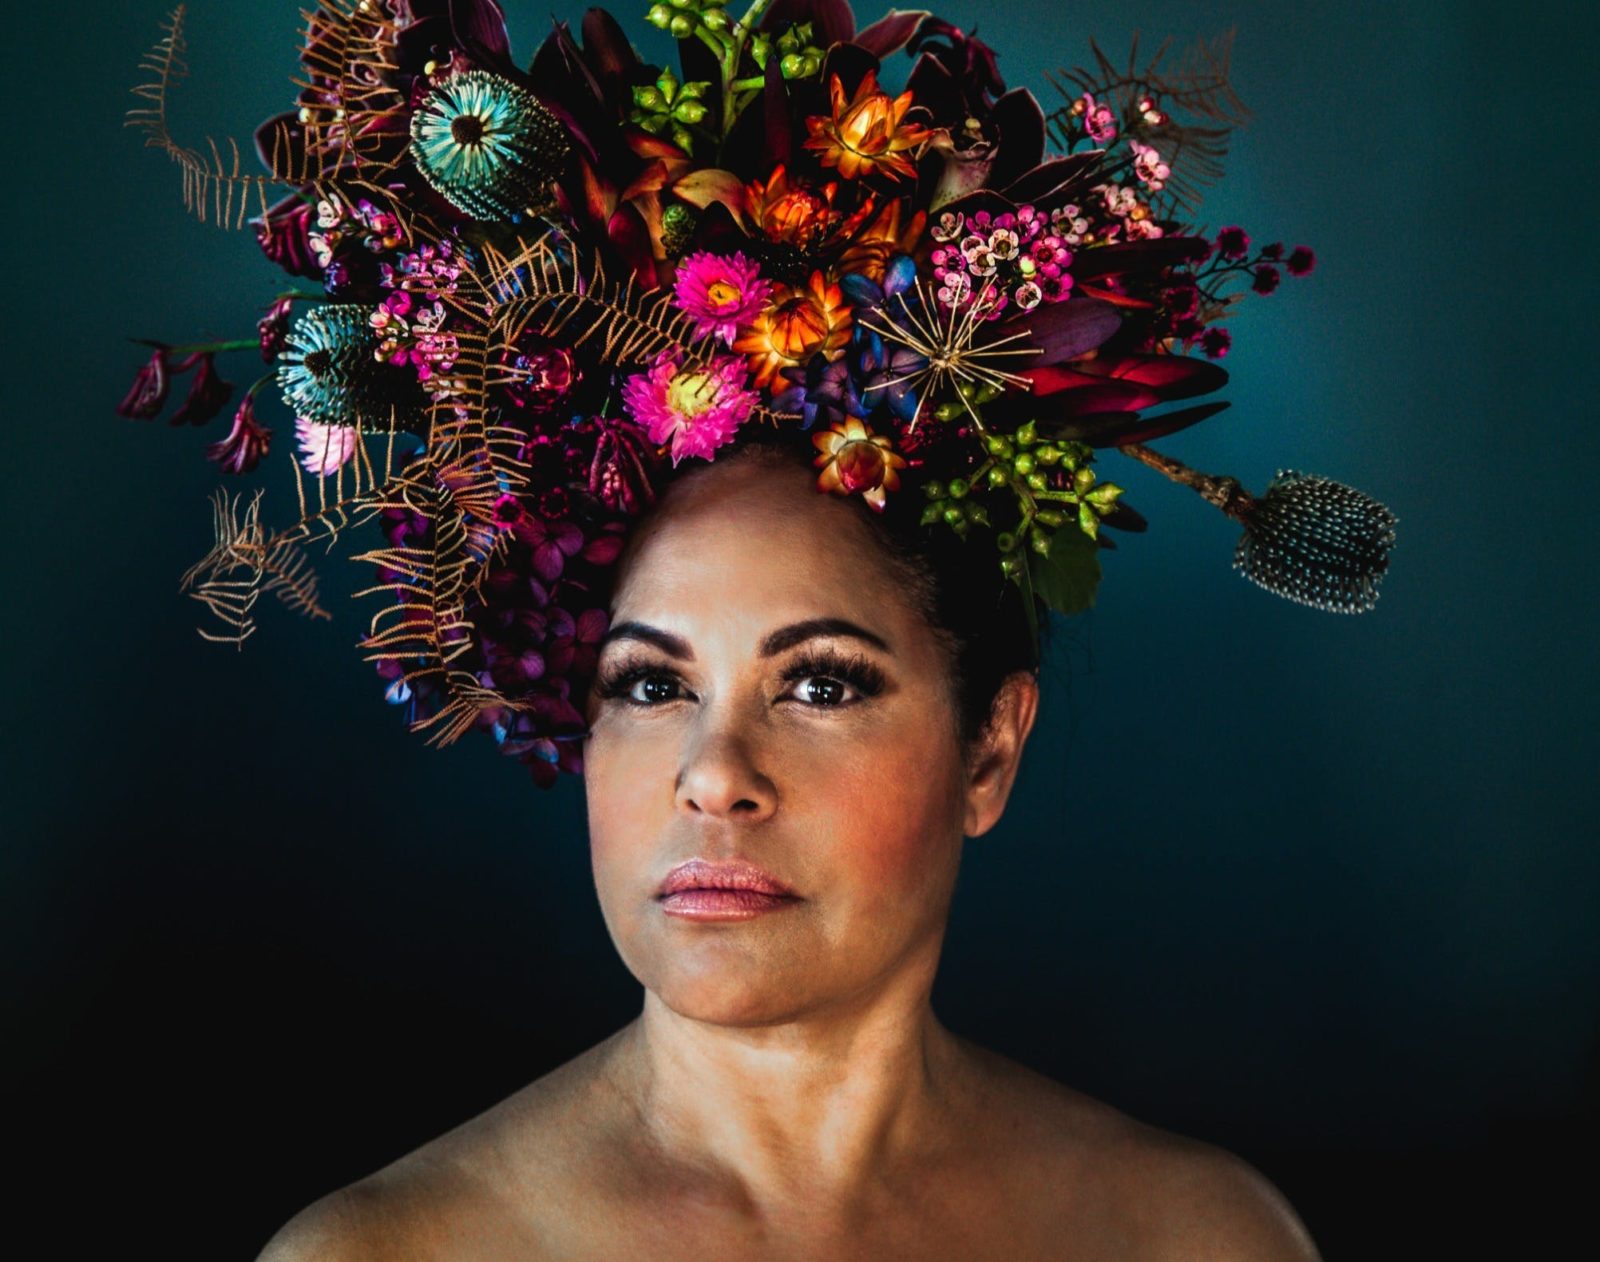 Christine Anu, shoulders up, is looking at the camera wearing a large colourful flower headpiece